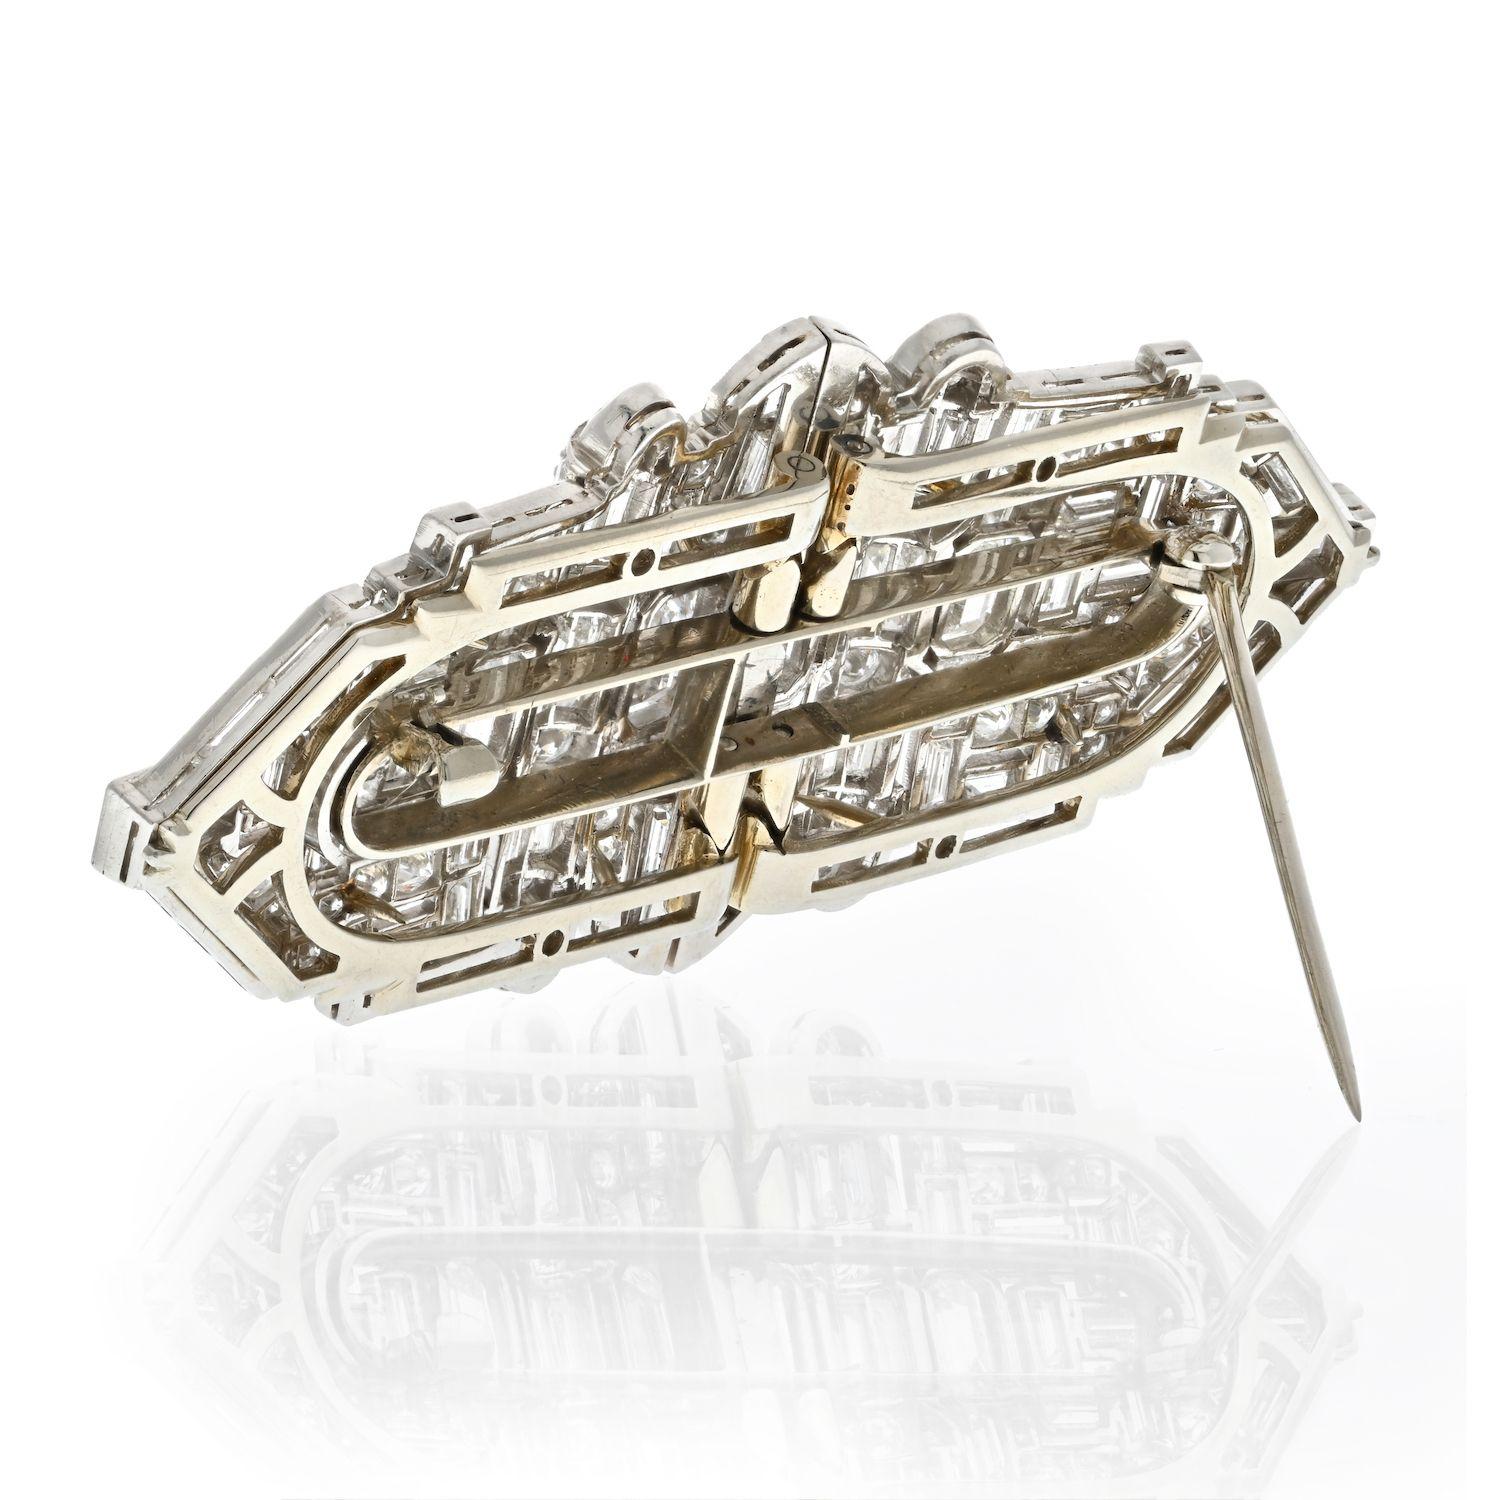 Art Deco diamond double clip brooches have recently come back into fashion due to their classic and timeless design. Additionally, their popularity has been revived by the rise of vintage styles and appreciation of timeless pieces. The unique and